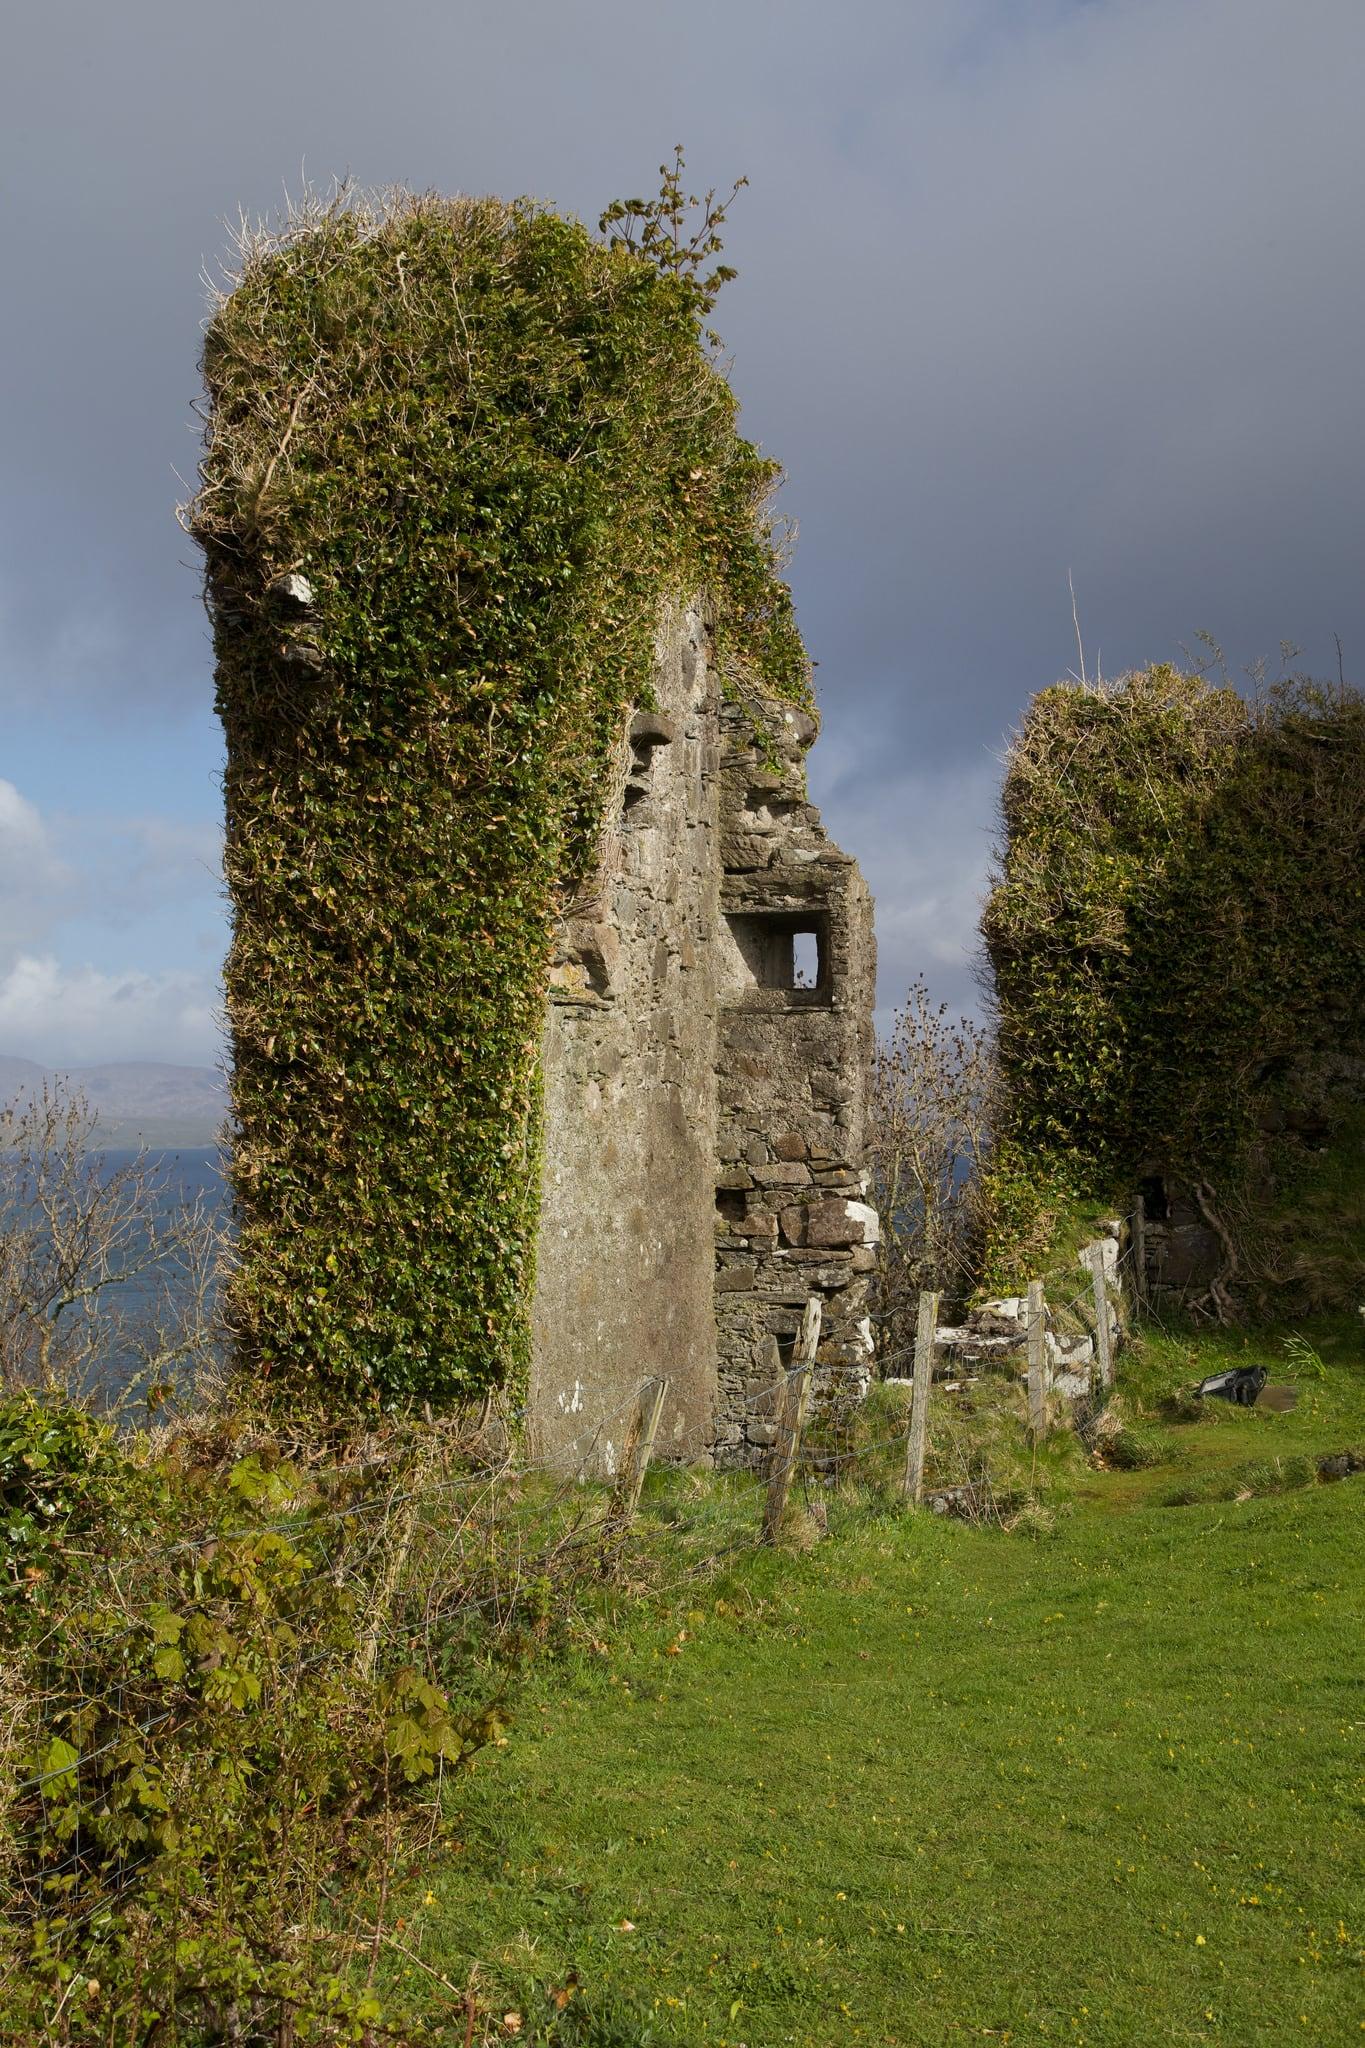 Dunollie Castle 的形象. canon scotland argyll oban straight 6d studytour 15thcentury scheduled ahss dunollie macdougalls dunolliecastle scheduledmonument canon6d tomparnell architecturalheritagesocietyofscotland itmpa archhist